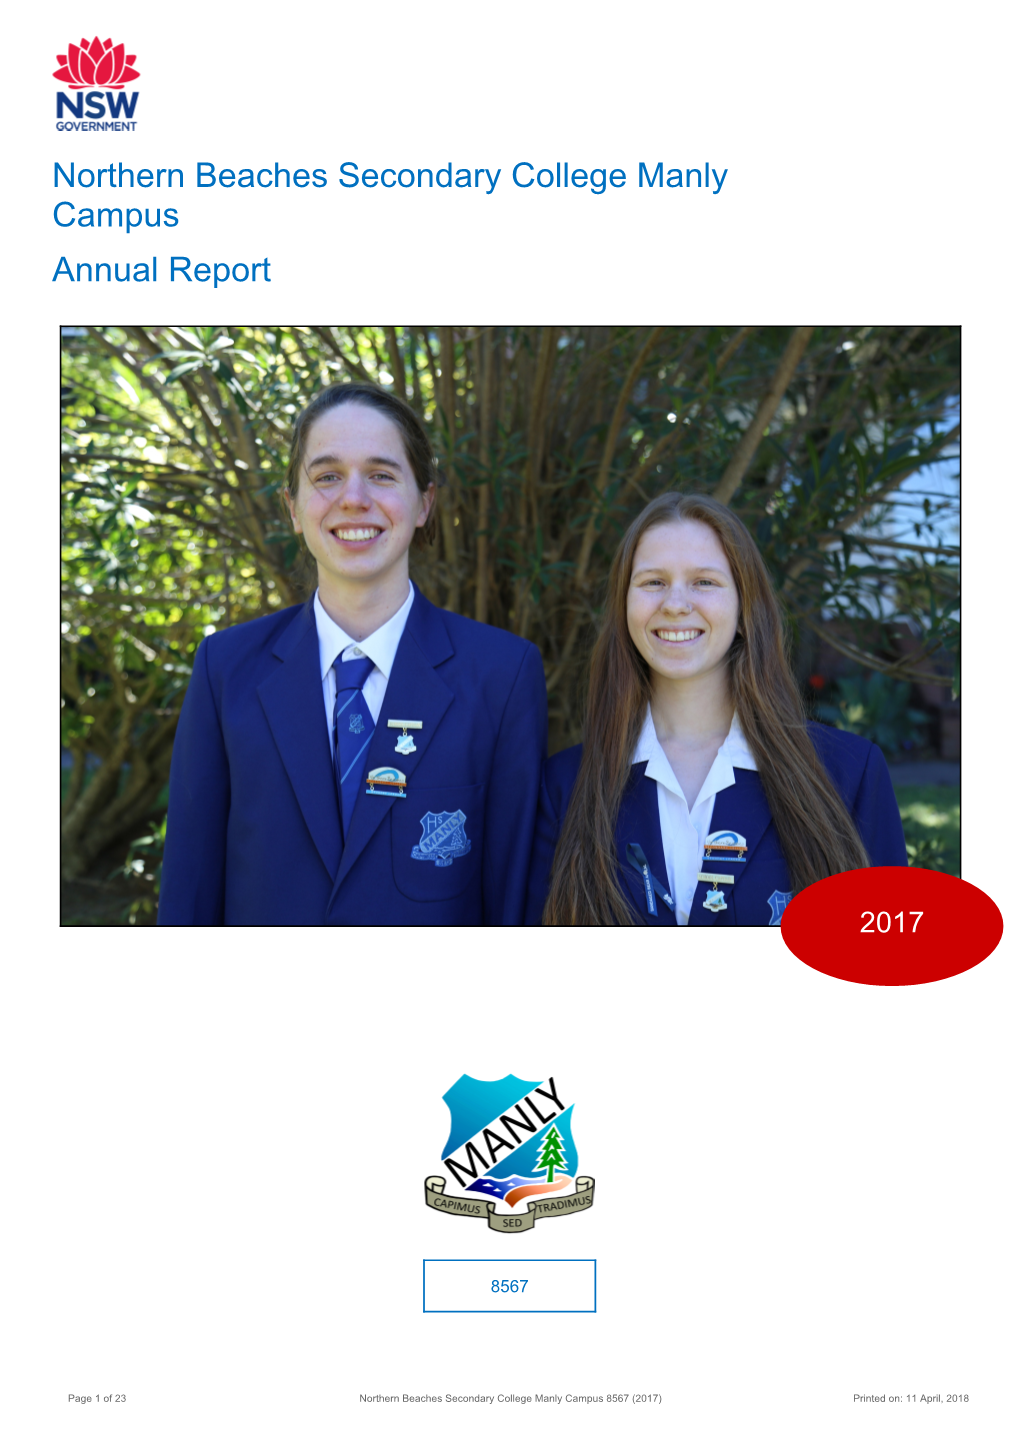 2017 Northern Beaches Secondary College Manly Campus Annual Report